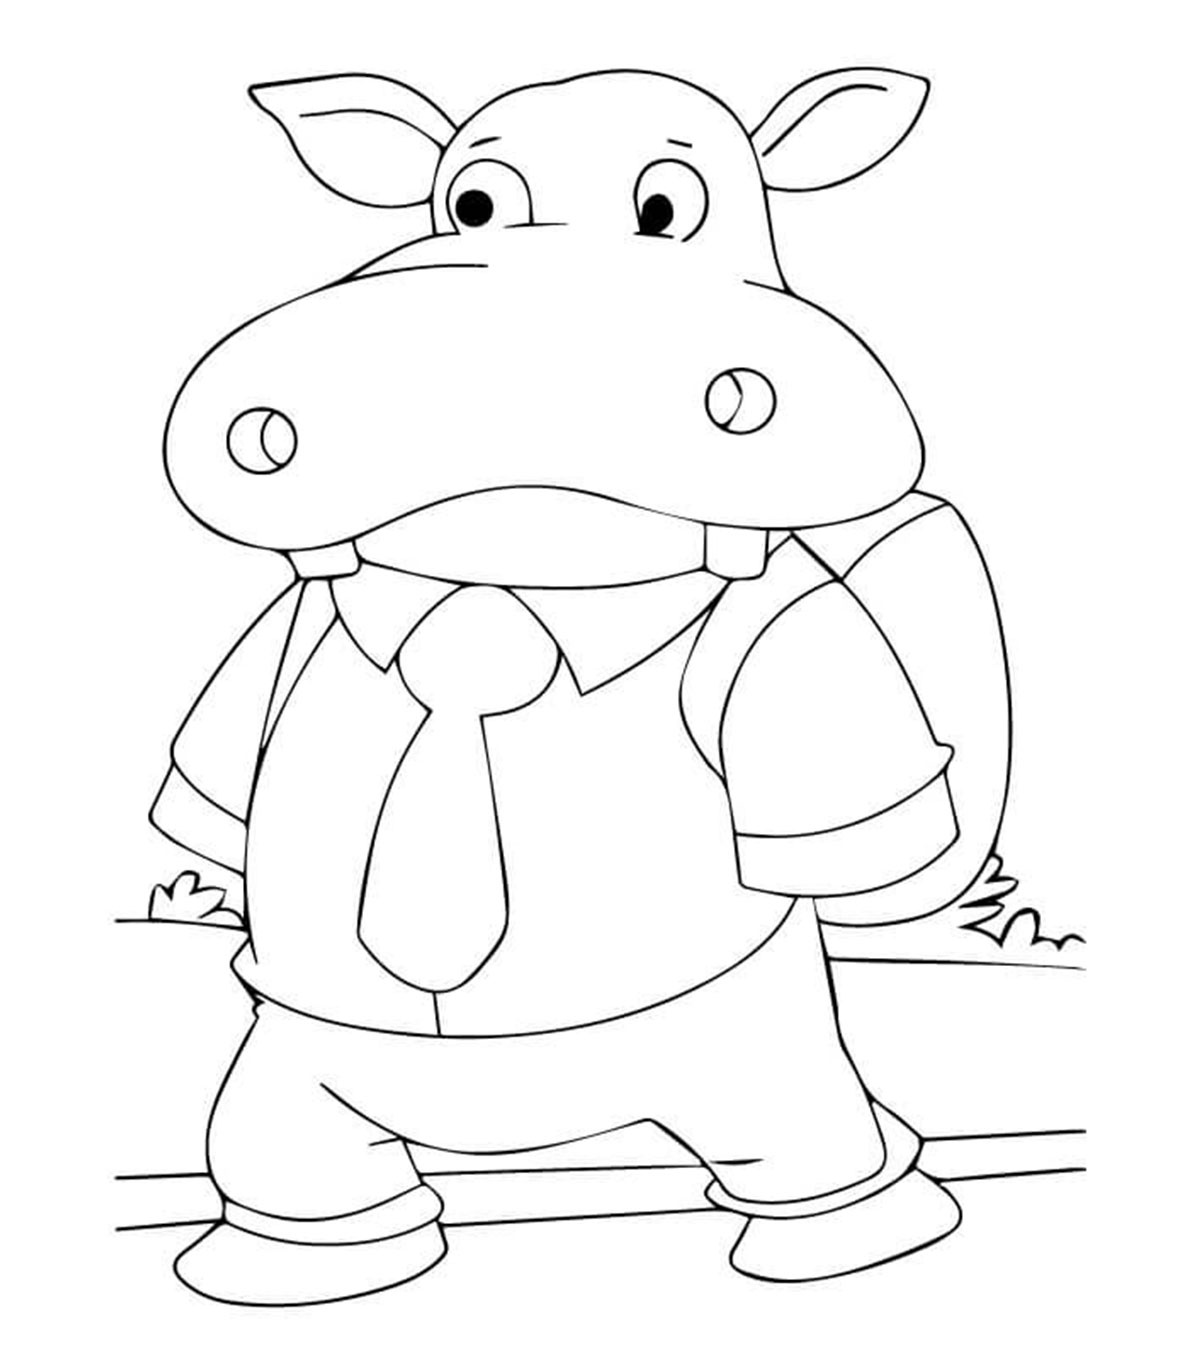 10 Cute Hippo Coloring Pages For Toddlers_image